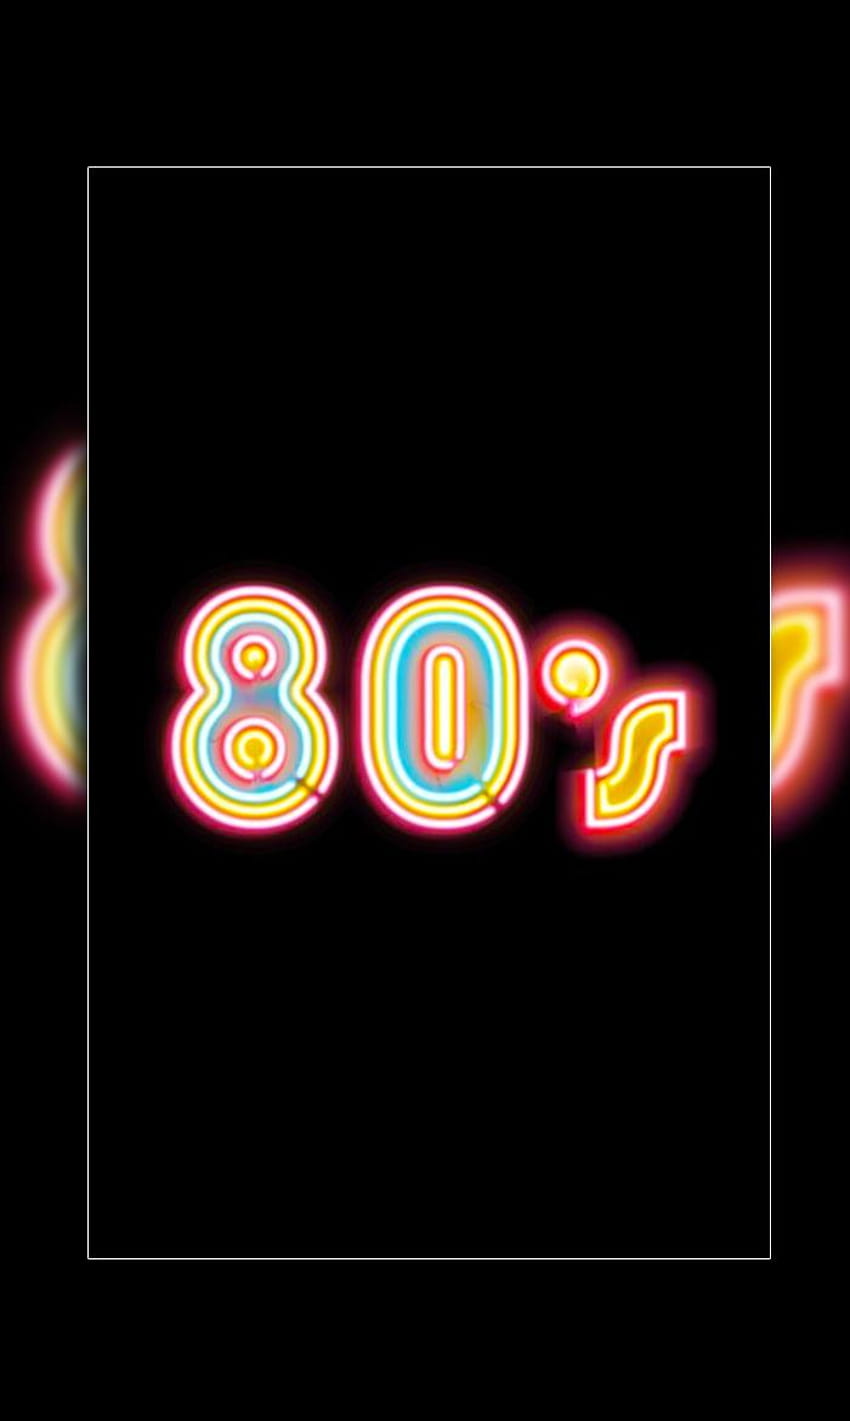 80's : Rad, Cool, Vaporwave for Android, aesthetic 80s HD phone wallpaper